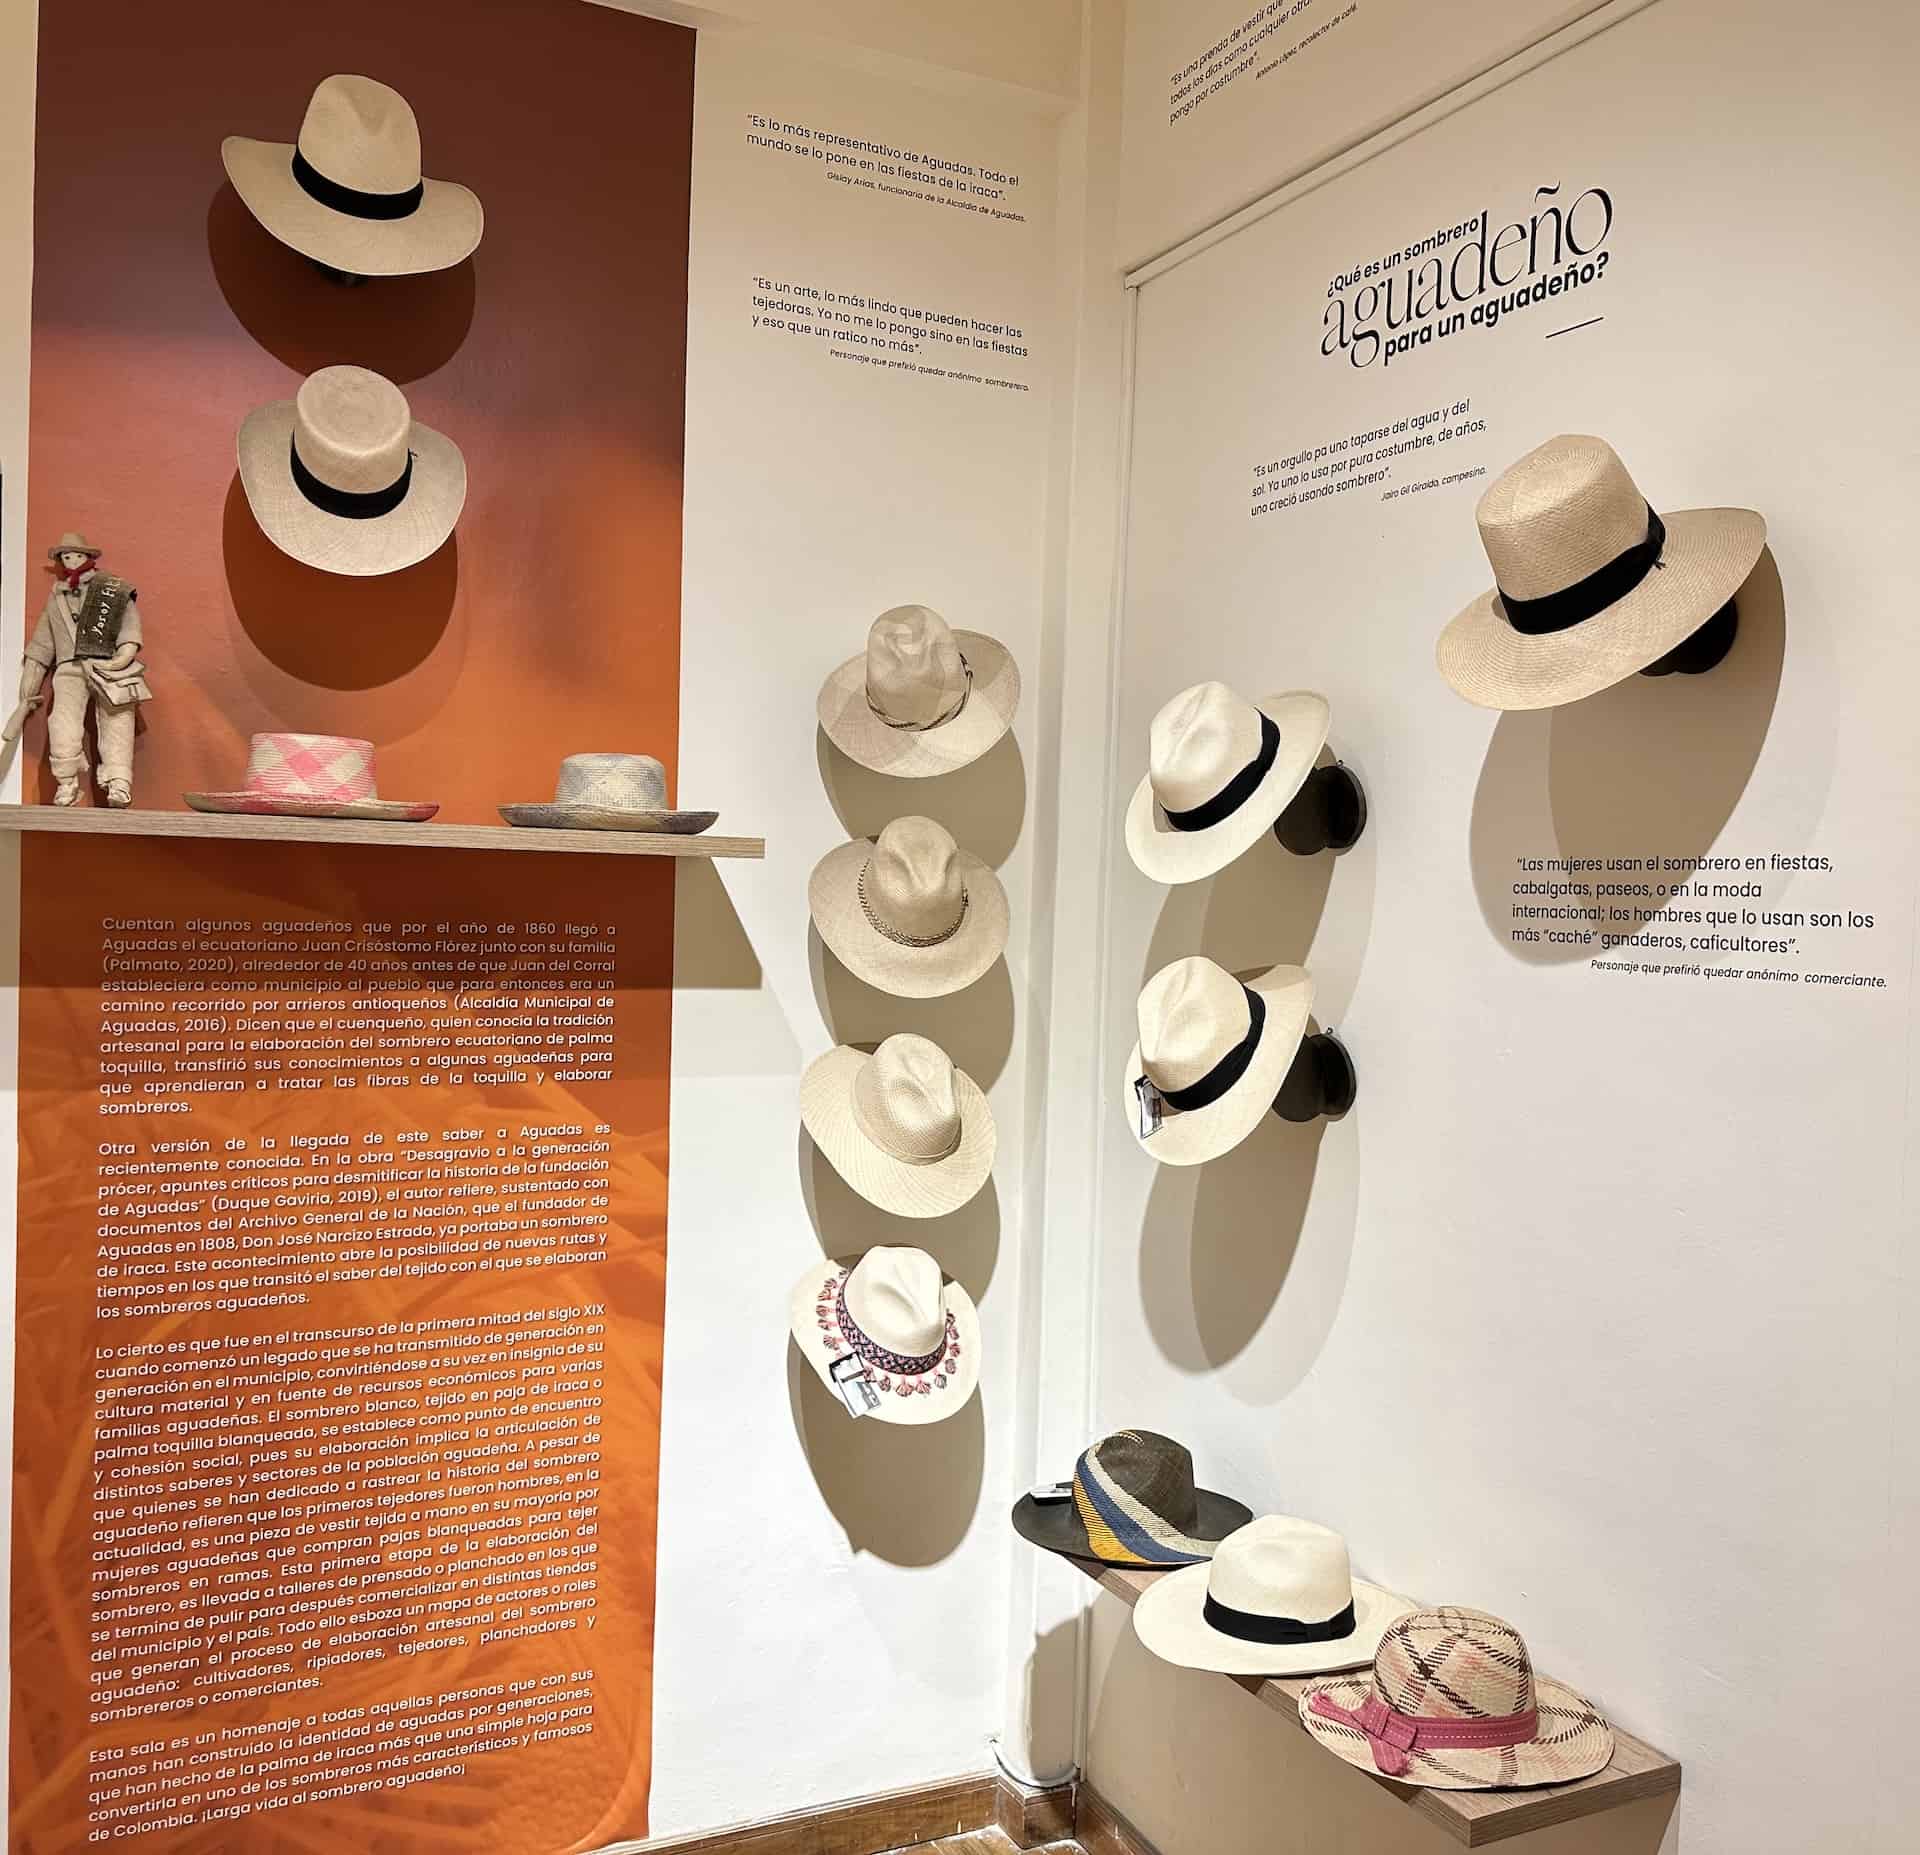 Traditional hats from Colombia called sombrero aguadeno and